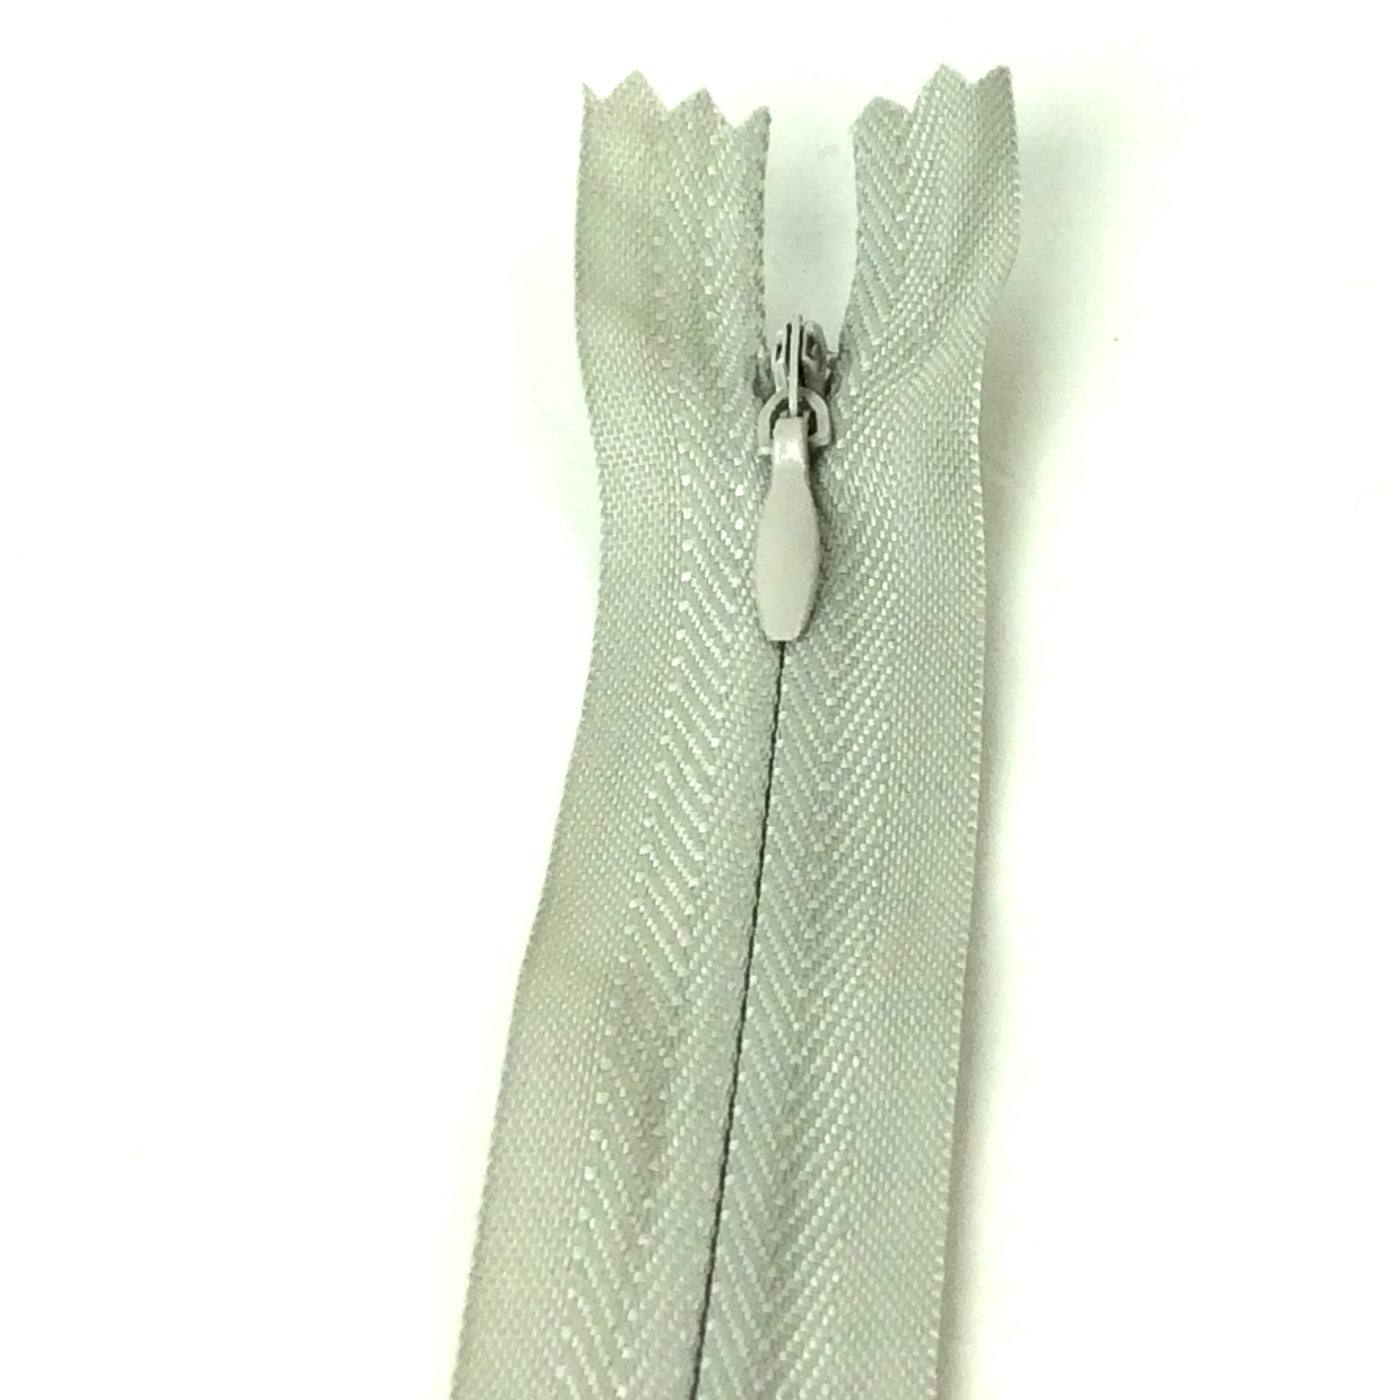 Photo of light grey invisible or concealed zips available in many different colours and sizes. Great for achieving a professional finish in your products. Invisible zippers are perfect for dressmaking, cushions, crafts, etc., where you don't want your zipper showing. Installing them can be tricky without the right foot on your machine; a normal zipper foot is for installing standard zippers, while you will need an invisible zipper foot for a professional result